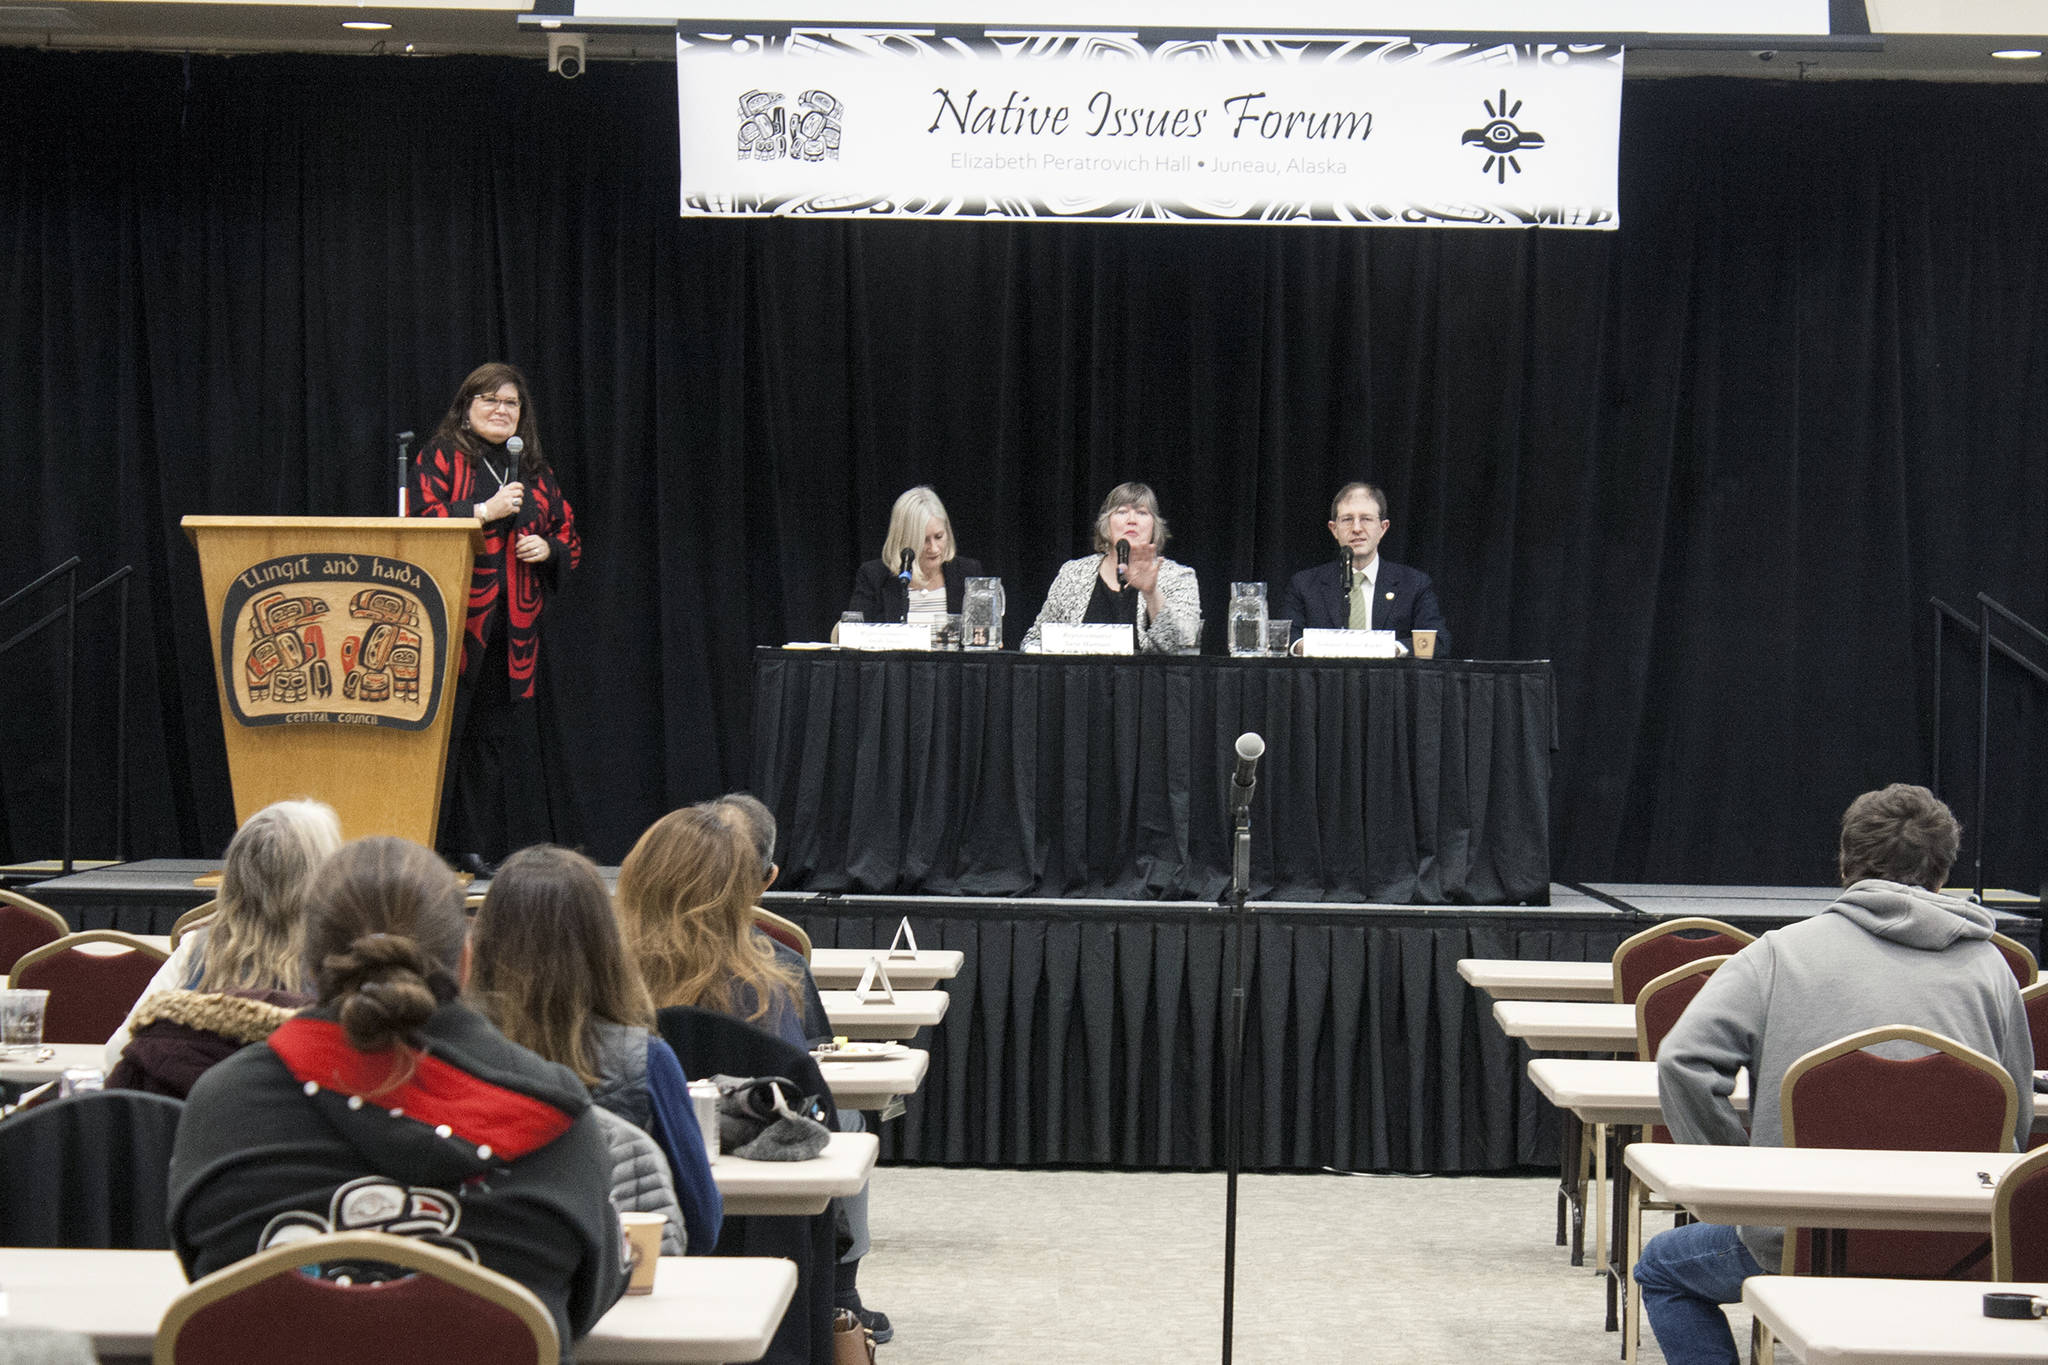 Central Council of Tlingit and Haida Indian Tribes of Alaska 2nd Vice President Jackie Pata introduces Reps. Andi Story and Sara Hannan and Sen. Jesse Kiehl a question during a Native Issues Forum Monday at Elizabeth Peratrovich Hall. (Ben Hohenstatt | Juneau Empire)